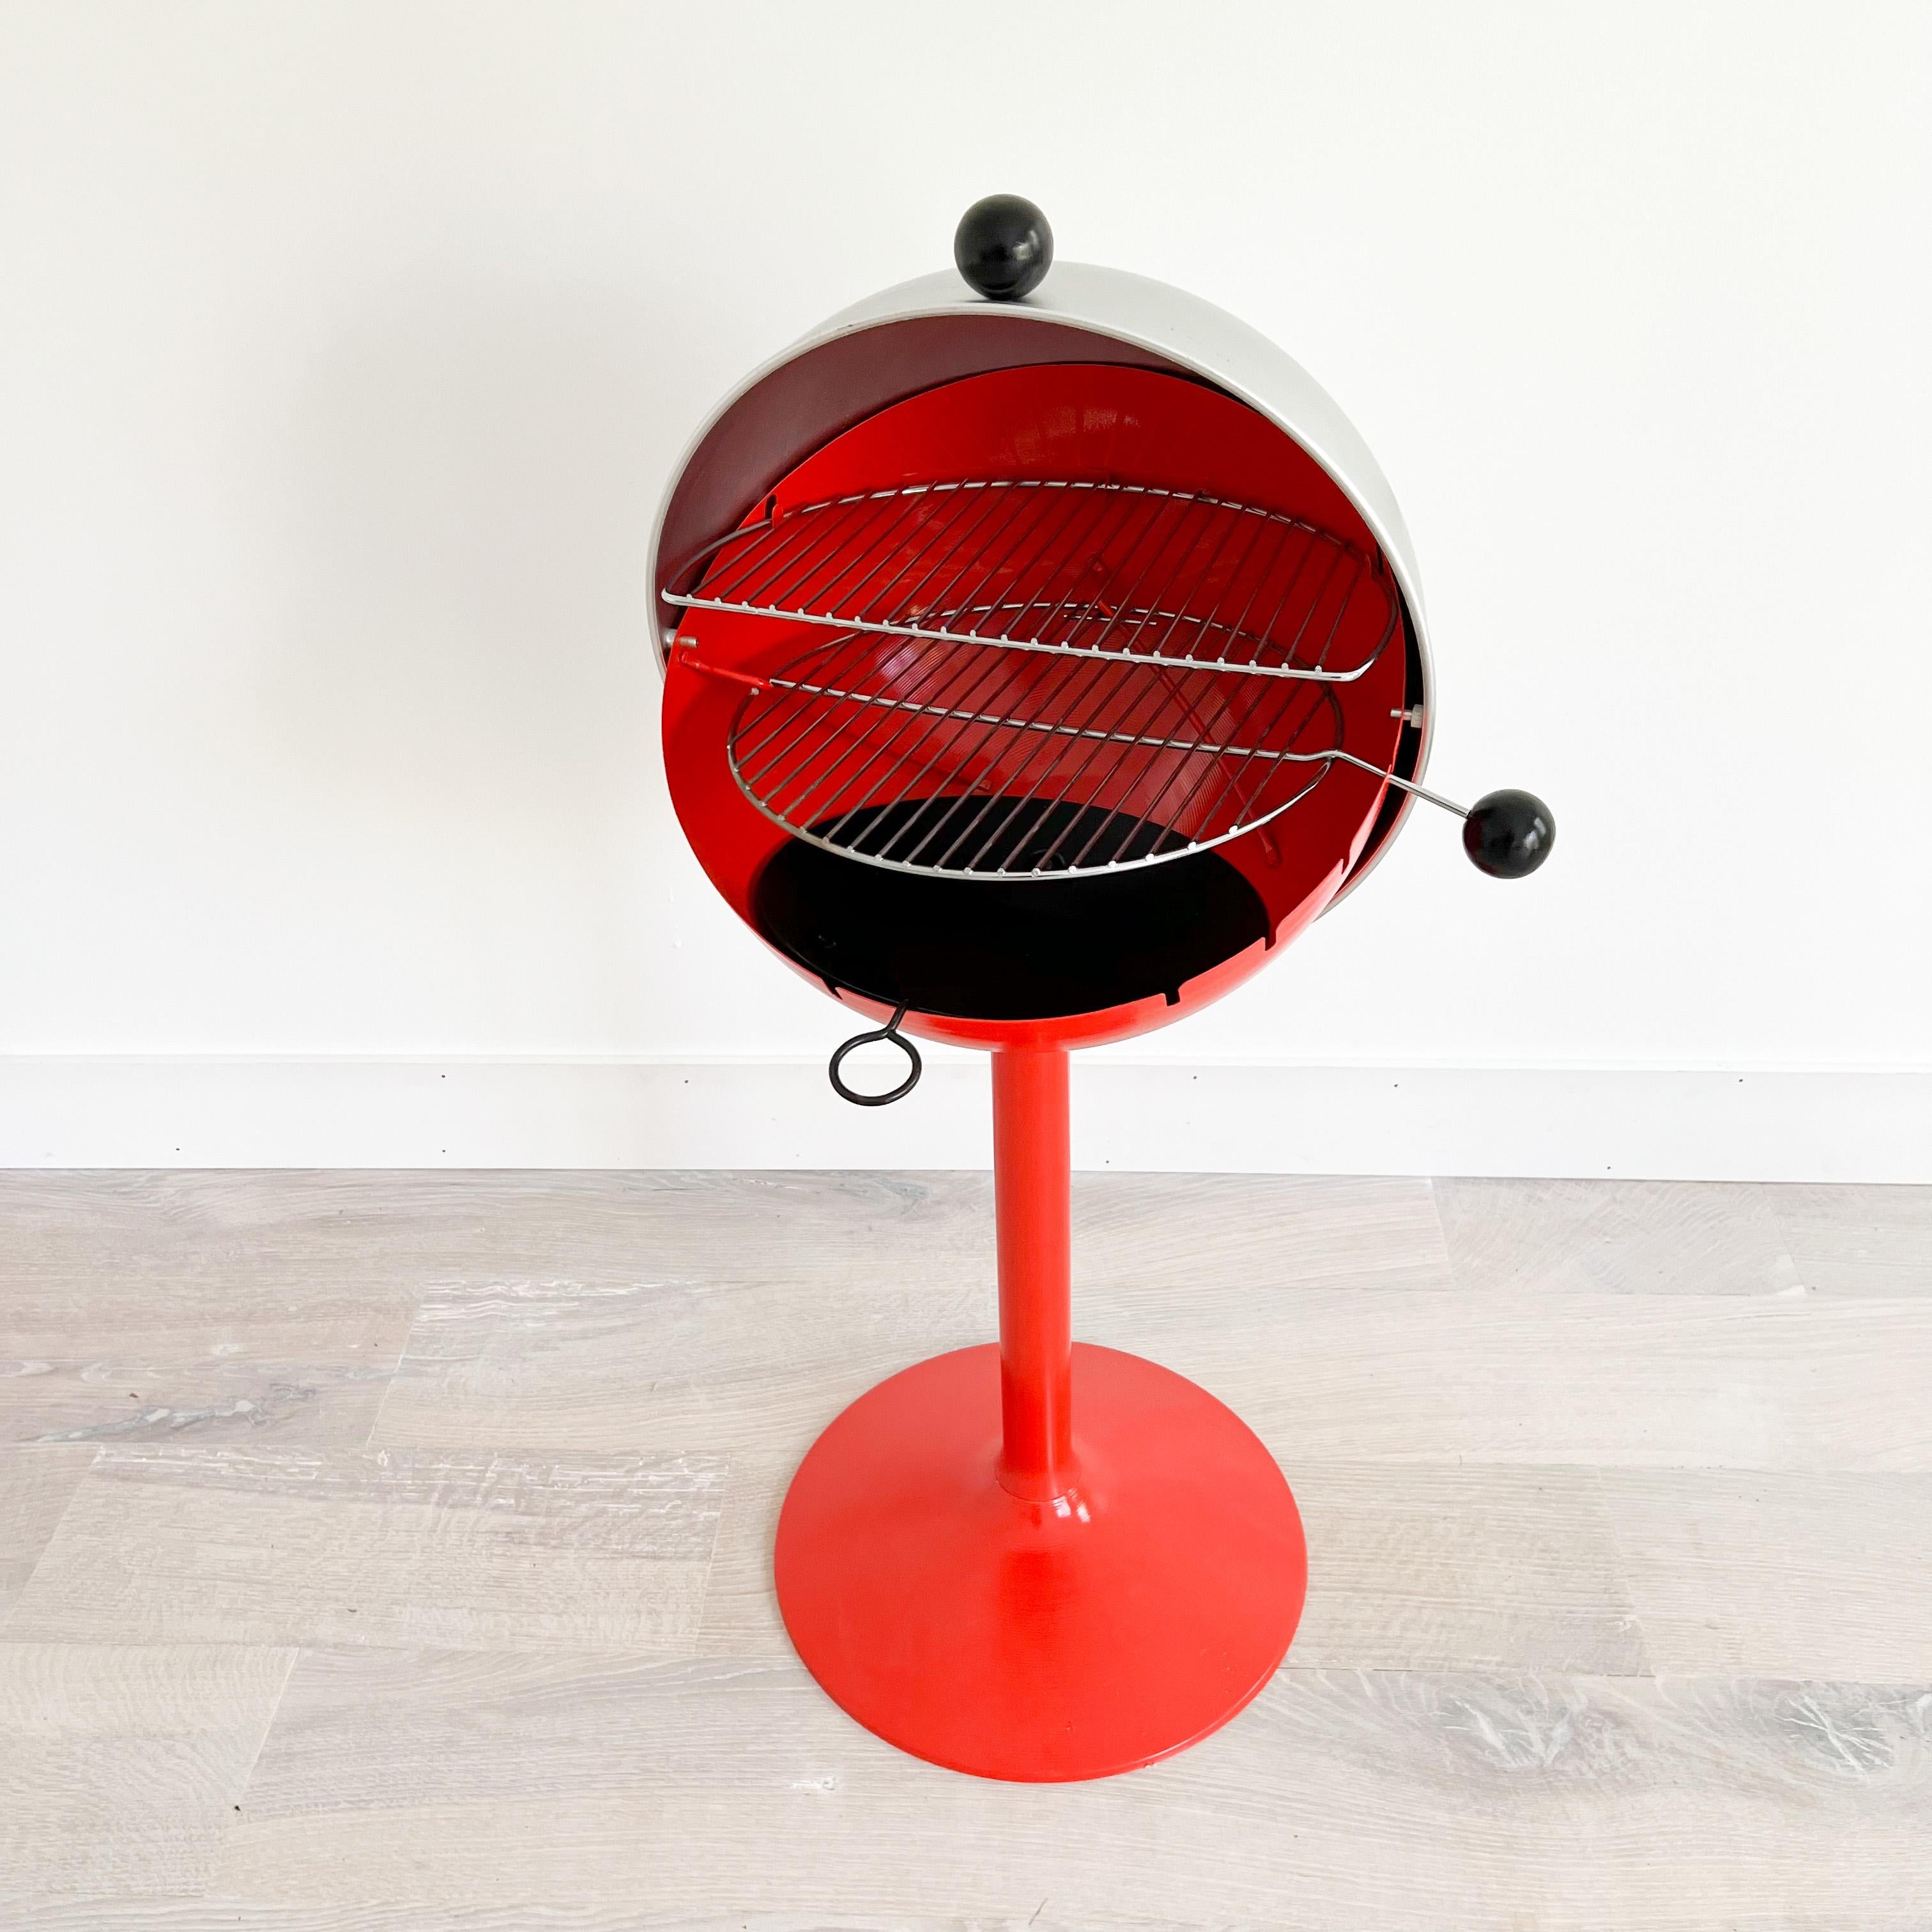 Never Been Used, New Old Stock Ball B Q Tulip Based Space Age Grill 1